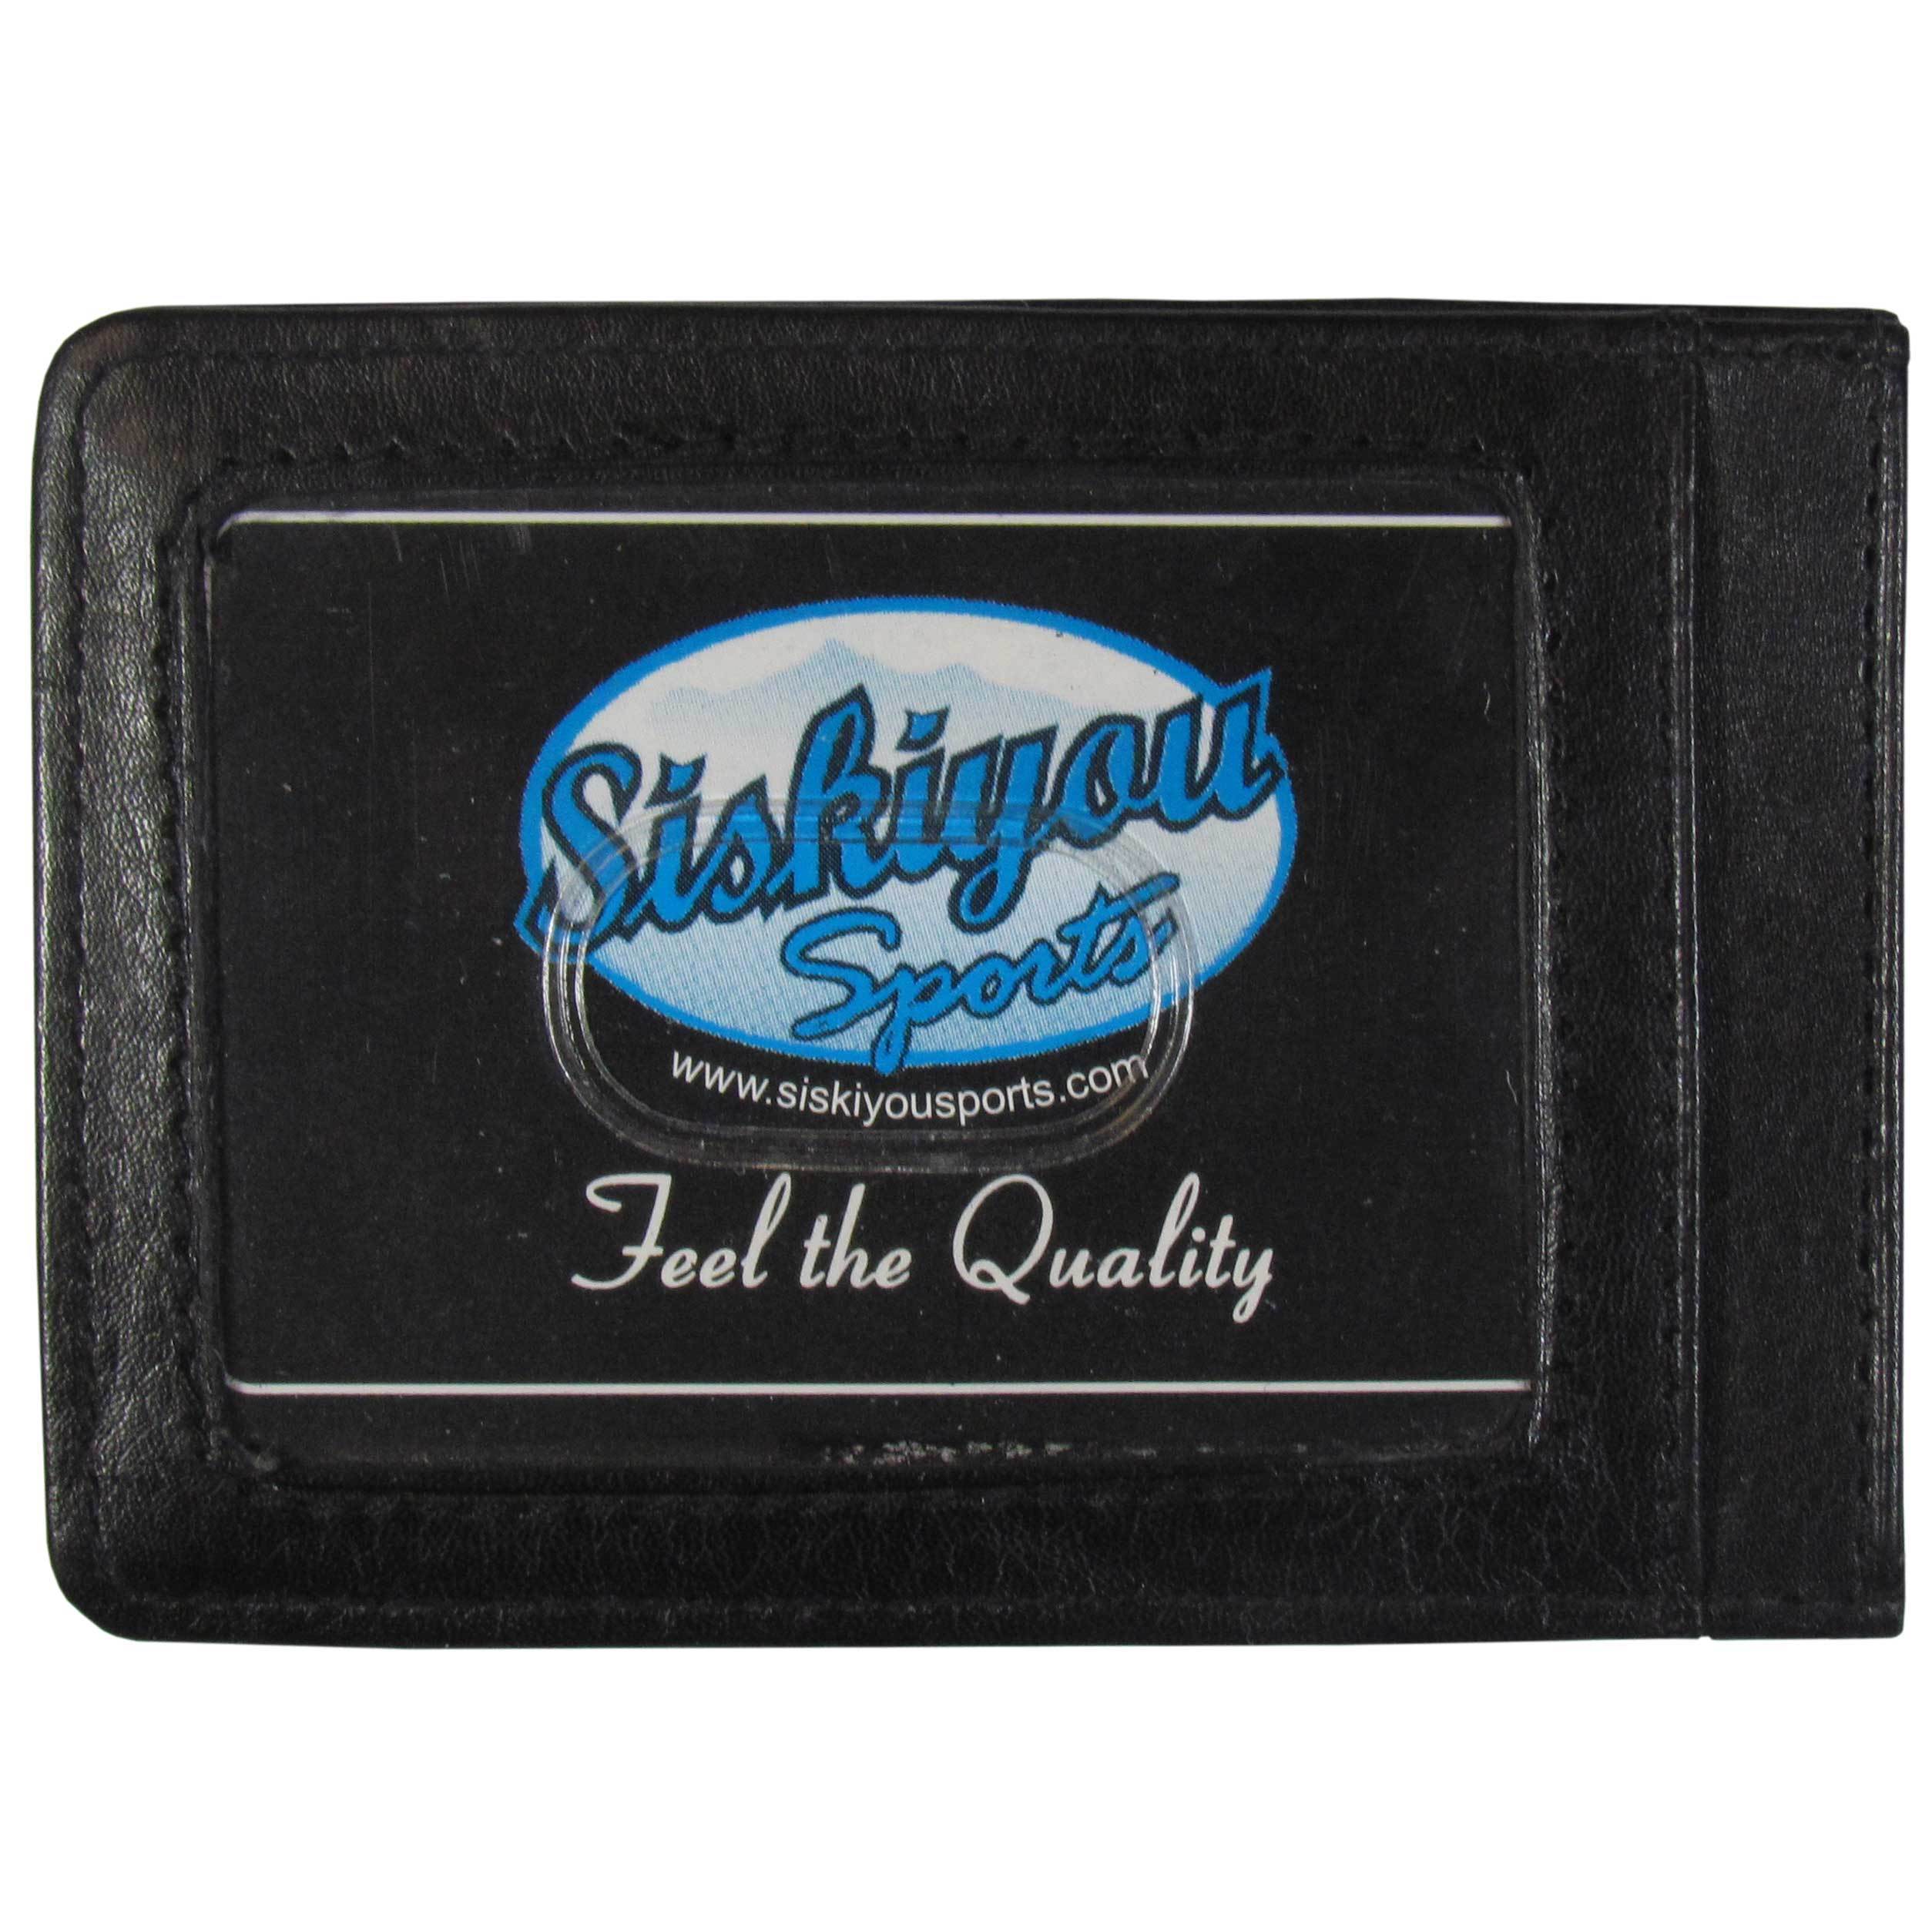 Ncaa -  Money Clip And Cardholder, Louis - image 4 of 4